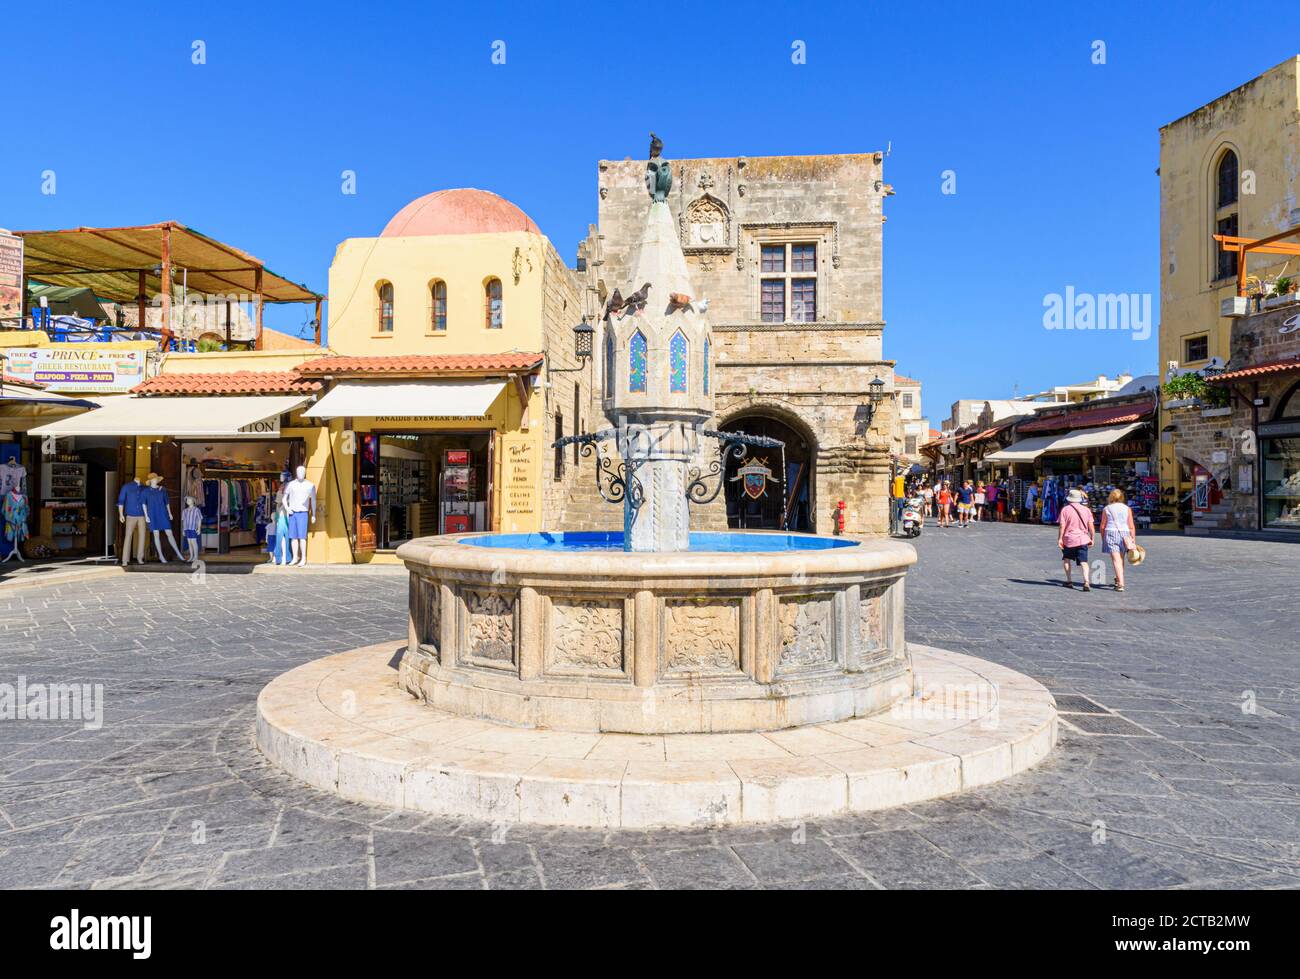 The Castellania fountain in Ippokratous Square, Rhodes Old Town, Rhodes Island, Greece Stock Photo